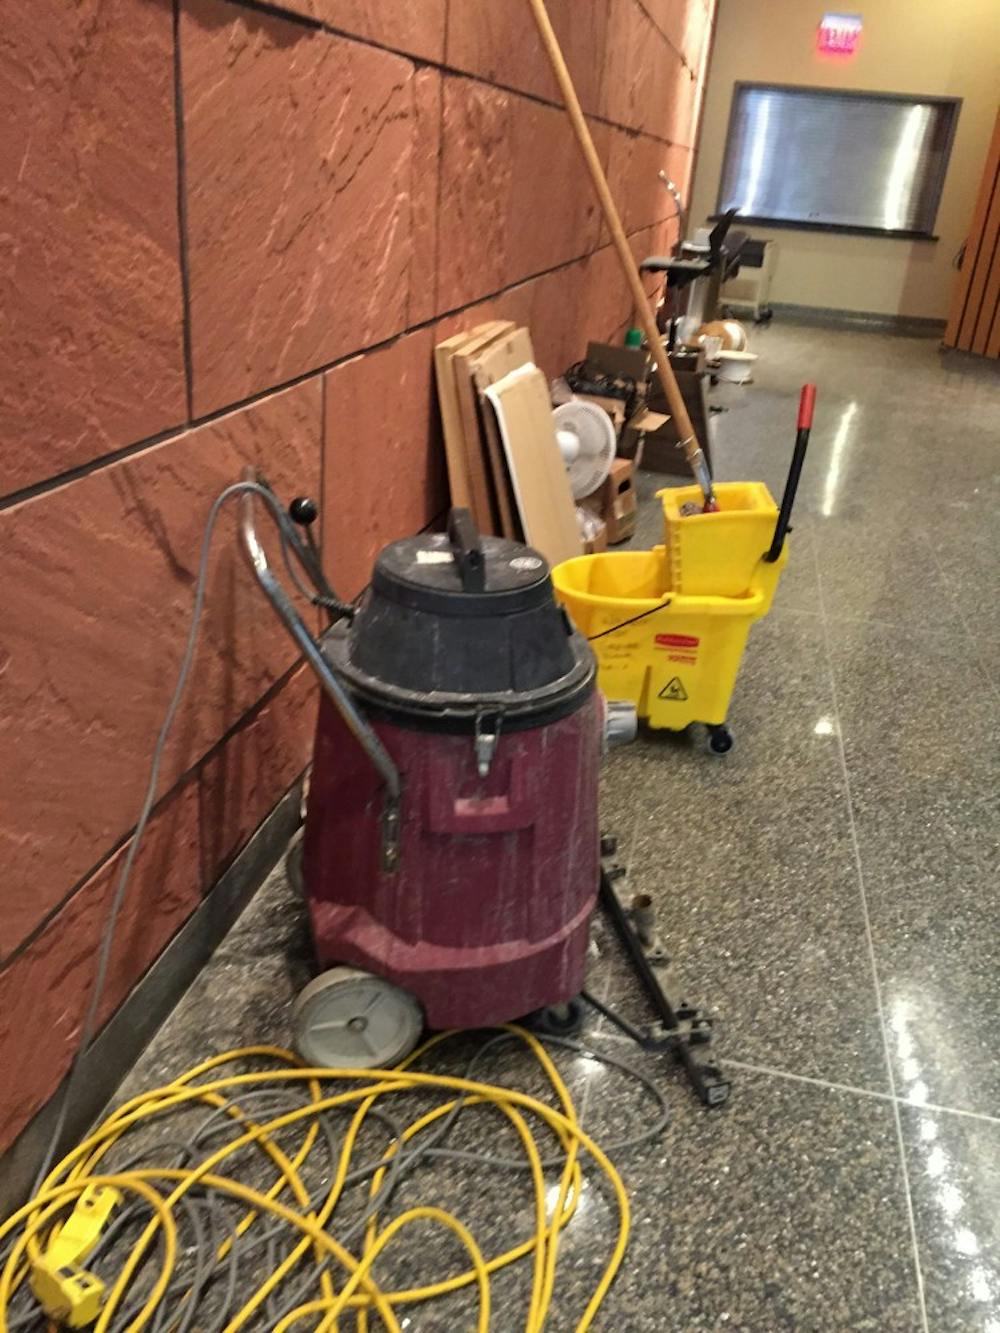 Maintenance equipment lined the wall near the Walnut Street entrance as of press time, including electrical cords, a bucket with a mop and a fan.